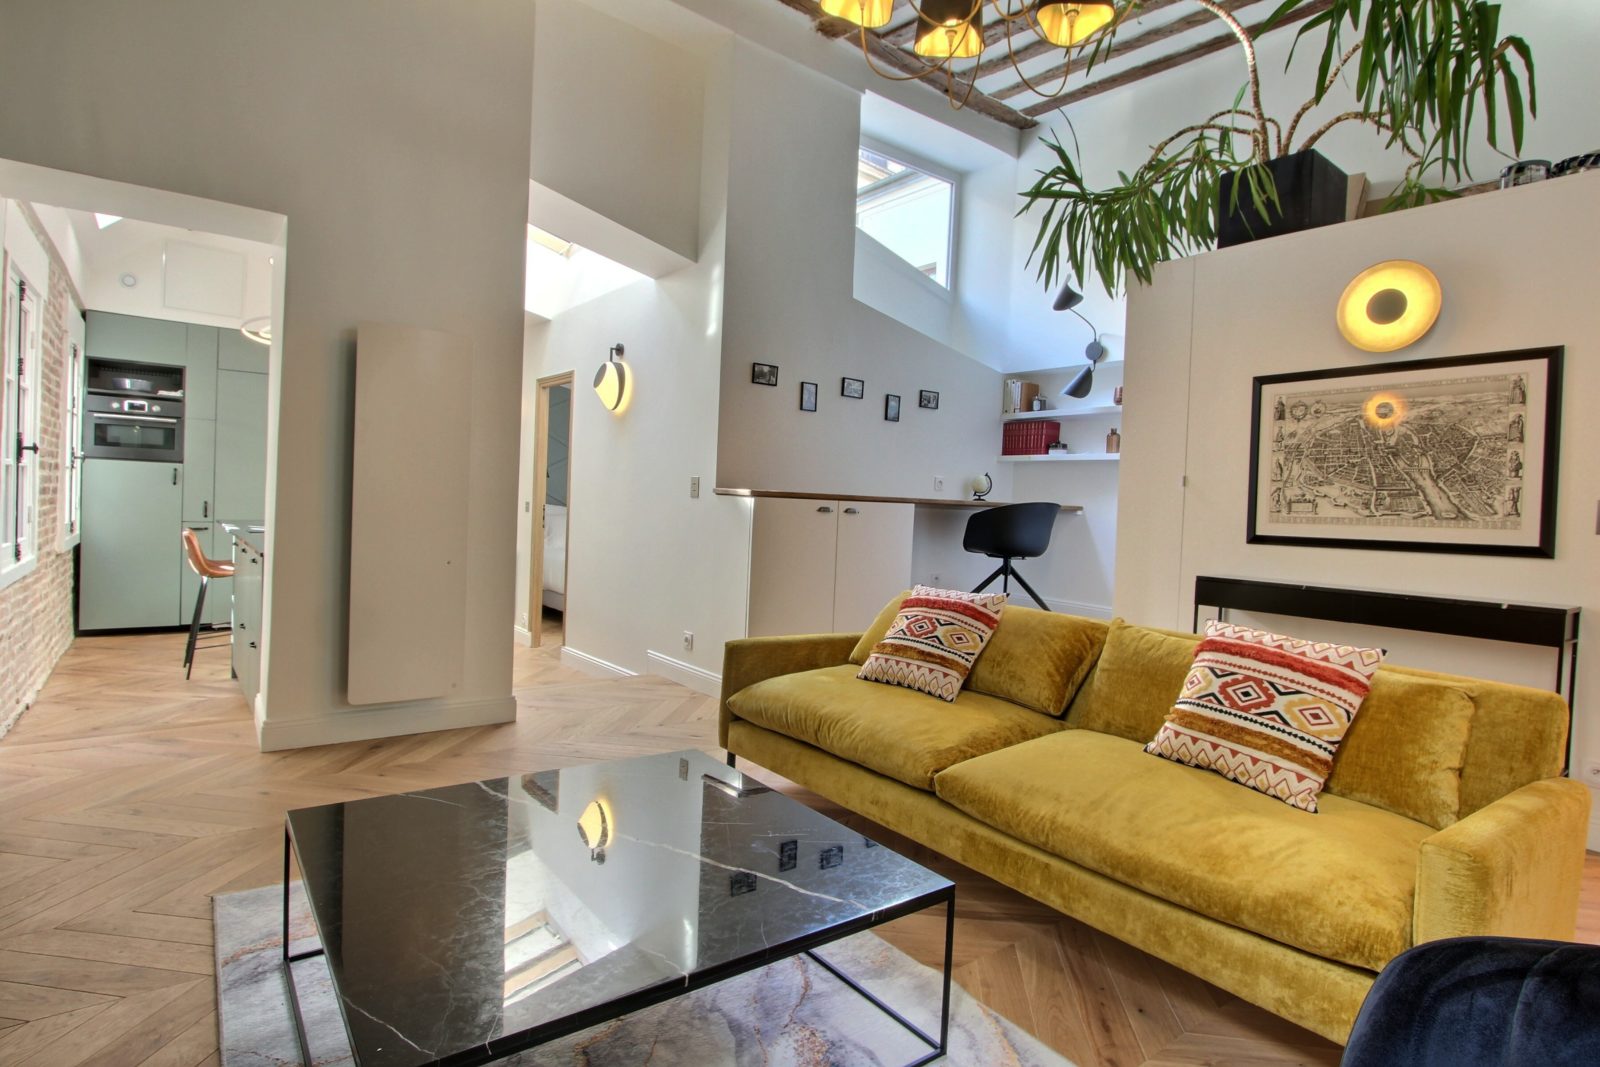 Well designed 2-bedroom in the Marais, recently refurbished